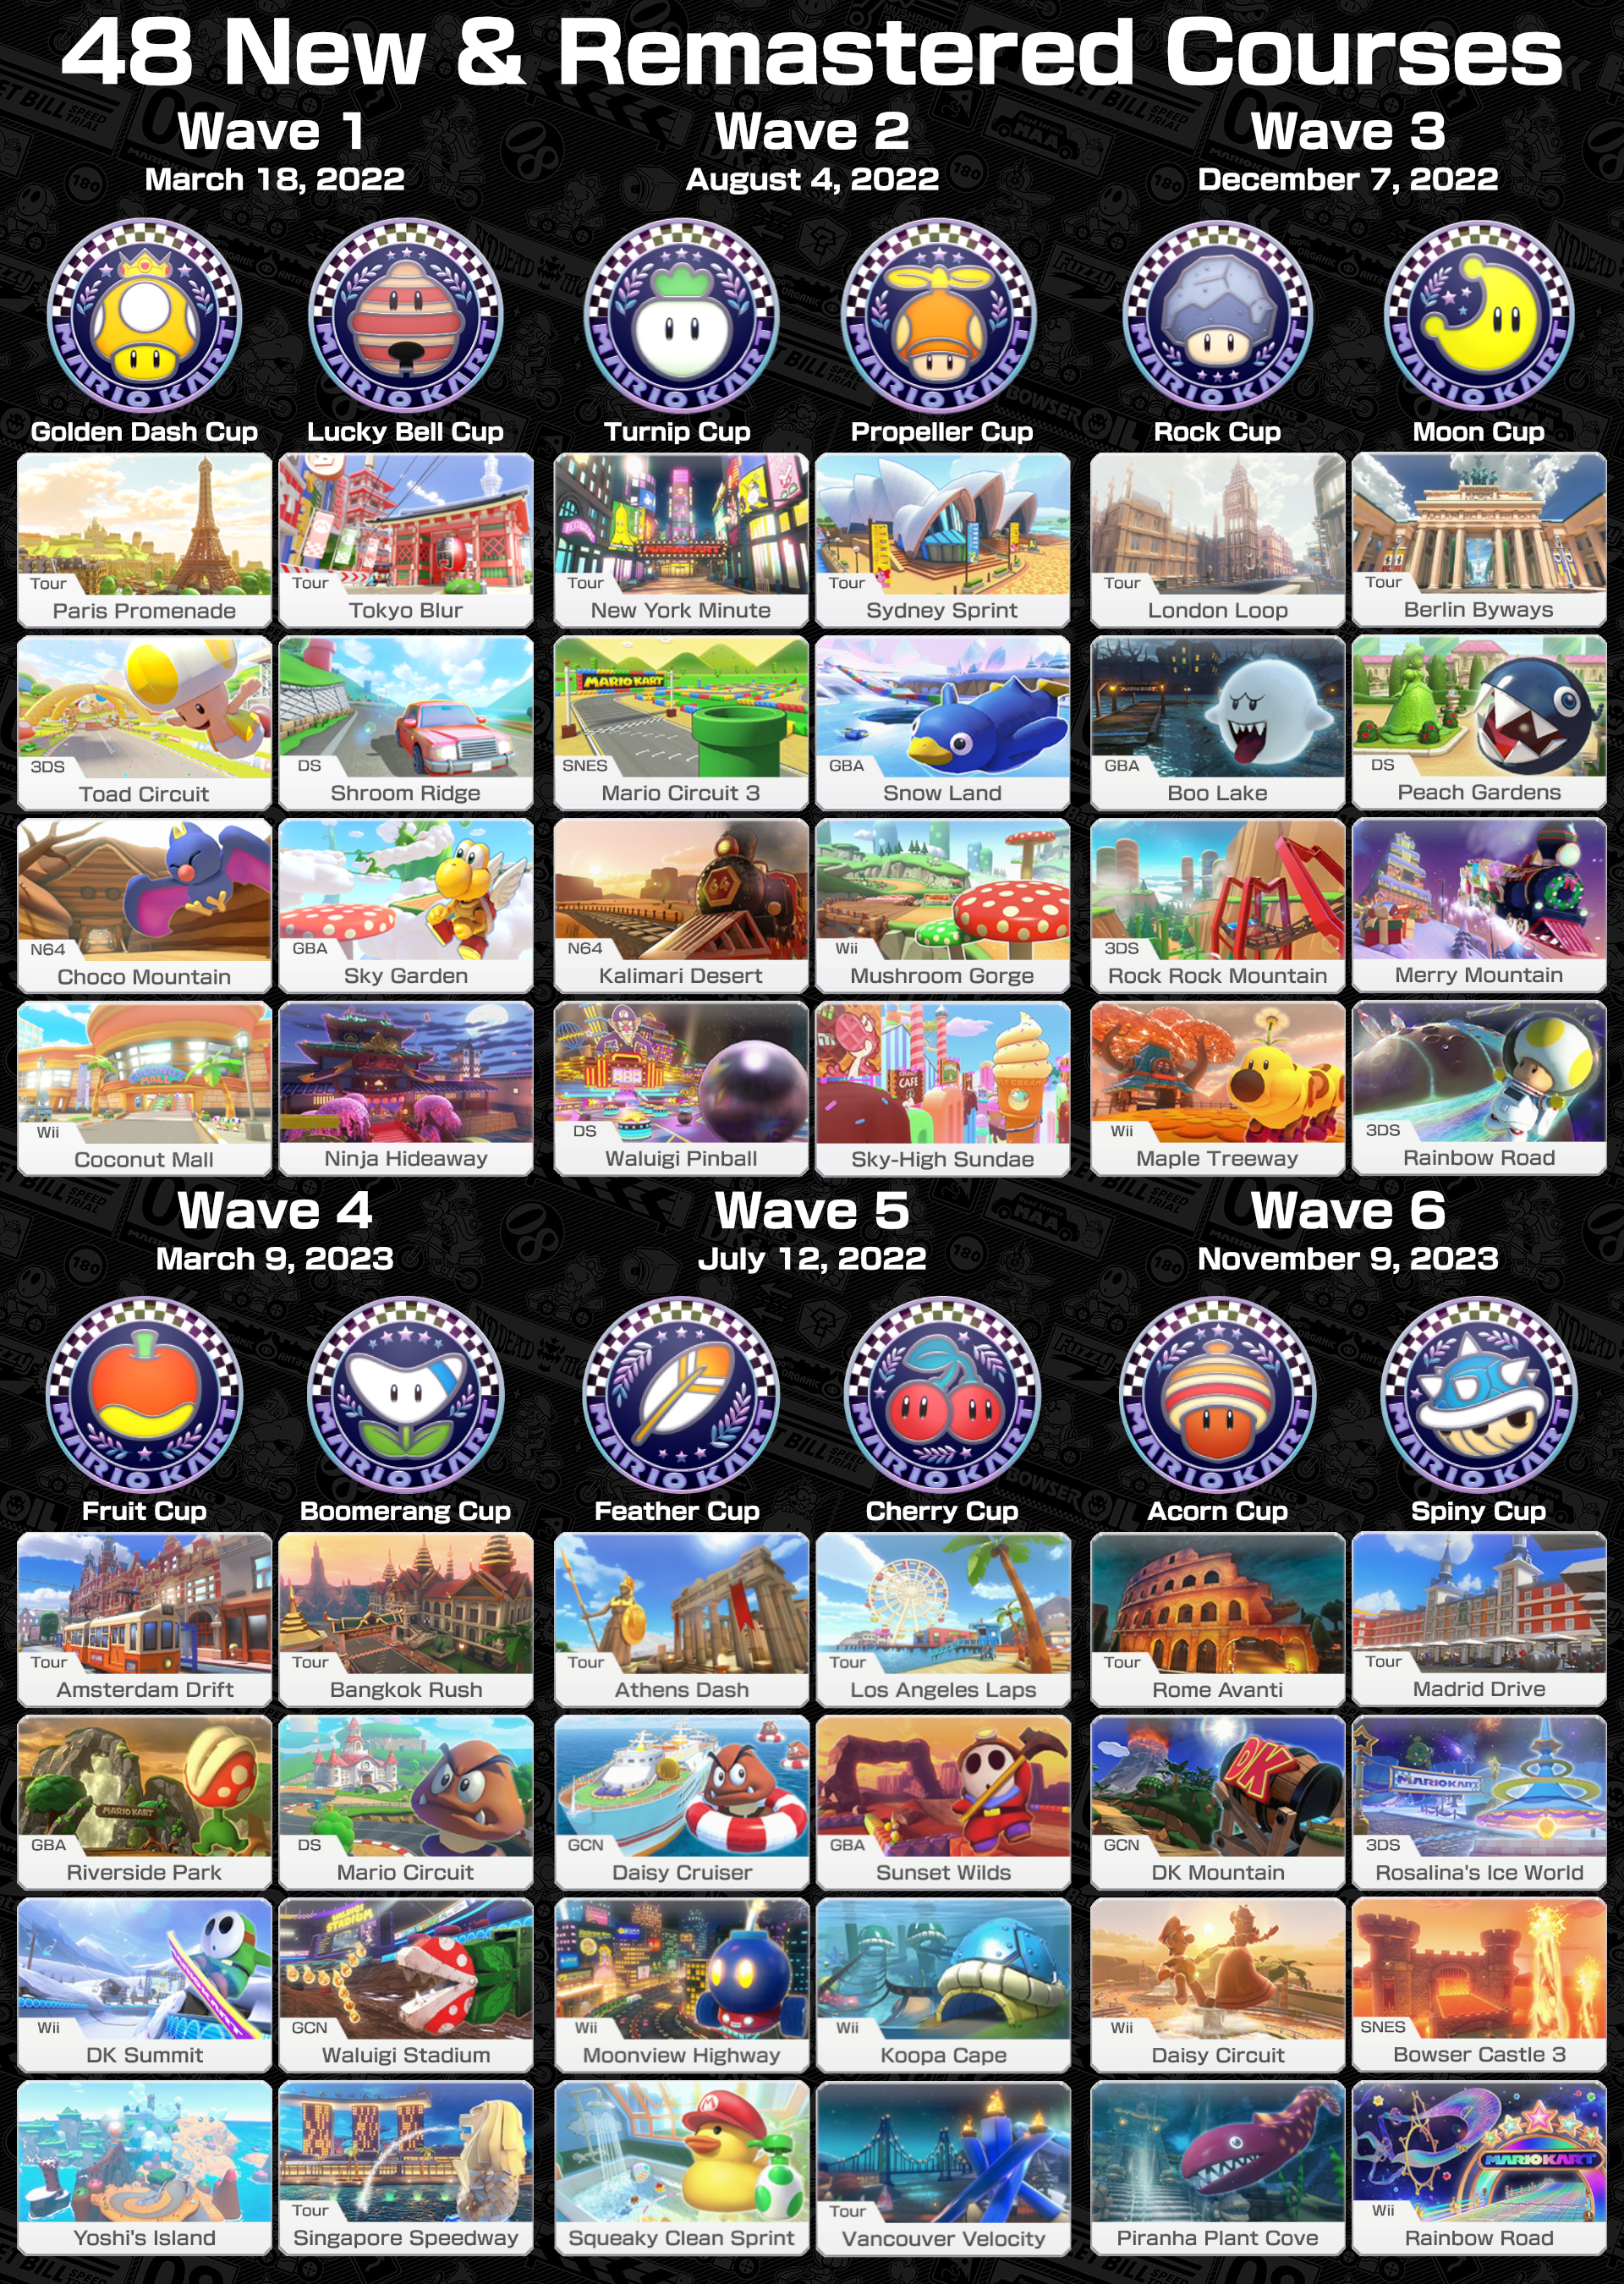 48 New & Remastered Courses - Wave 1 (March 18, 2022): Golden Dash Cup - Tour Paris Promenade, 3DS Toad Circuit, N64 Choco Mountain, Wii Coconut Mall; Lucky Cat Cup - Tour Tokyo Blur, DS Shroom Ridge, GBA Sky Garden, Tour Ninja Hideaway; Wave 2 (August 4, 2022): Turnip Cup - Tour New York Minute, SNES Mario Circuit 3, N64 Kalimari Desert, DS Waluigi Pinball; Propeller Cup - Tour Sydney Sprint, GBA Snow Land, Wii Mushroom Gorge, Sky-High Sundae; Wave 3 (December 7, 2022): Rock Cup - Tour London Loop, GBA Boo Lake, 3DS Rock Rock Mountain, Wii Maple Treeway; Moon Cup - Tour Berlin Byways, DS Peach Gardens, Merry Mountain, 3DS Rainbow Road; Wave 4 (March 9, 2023): Fruit Cup - Tour Amsterdam Drift, GBA Riverside Park, Wii DK Summit, Yoshi's Island; Boomerang Cup - Tour Bangkok Rush, DS Mario Circuit, GCN Waluigi Stadium, Tour Singapore Speedway; Wave 5 (July 12, 202): Feather Cup - Tour Athens Dash, GCN Daisy Cruiser, Wii Moonview Highway, Squeaky Clean Sprint; Cherry Cup - Tour Los Angeles Laps, GBA Sunset Wilds, Wii Koopa Cape, Tour Vancouver Velocity; Wave 6 (November 9, 2023): Acorn Cup - Tour Rome Avanti, GCN DK Mountain, Wii Daisy Circuit, Piranha Plant Cove; Spiny Cup - Tour Madrid Drive, 3DS Rosalina's Ice World, SNES Bowser Castle 3, Wii Rainbow Road.